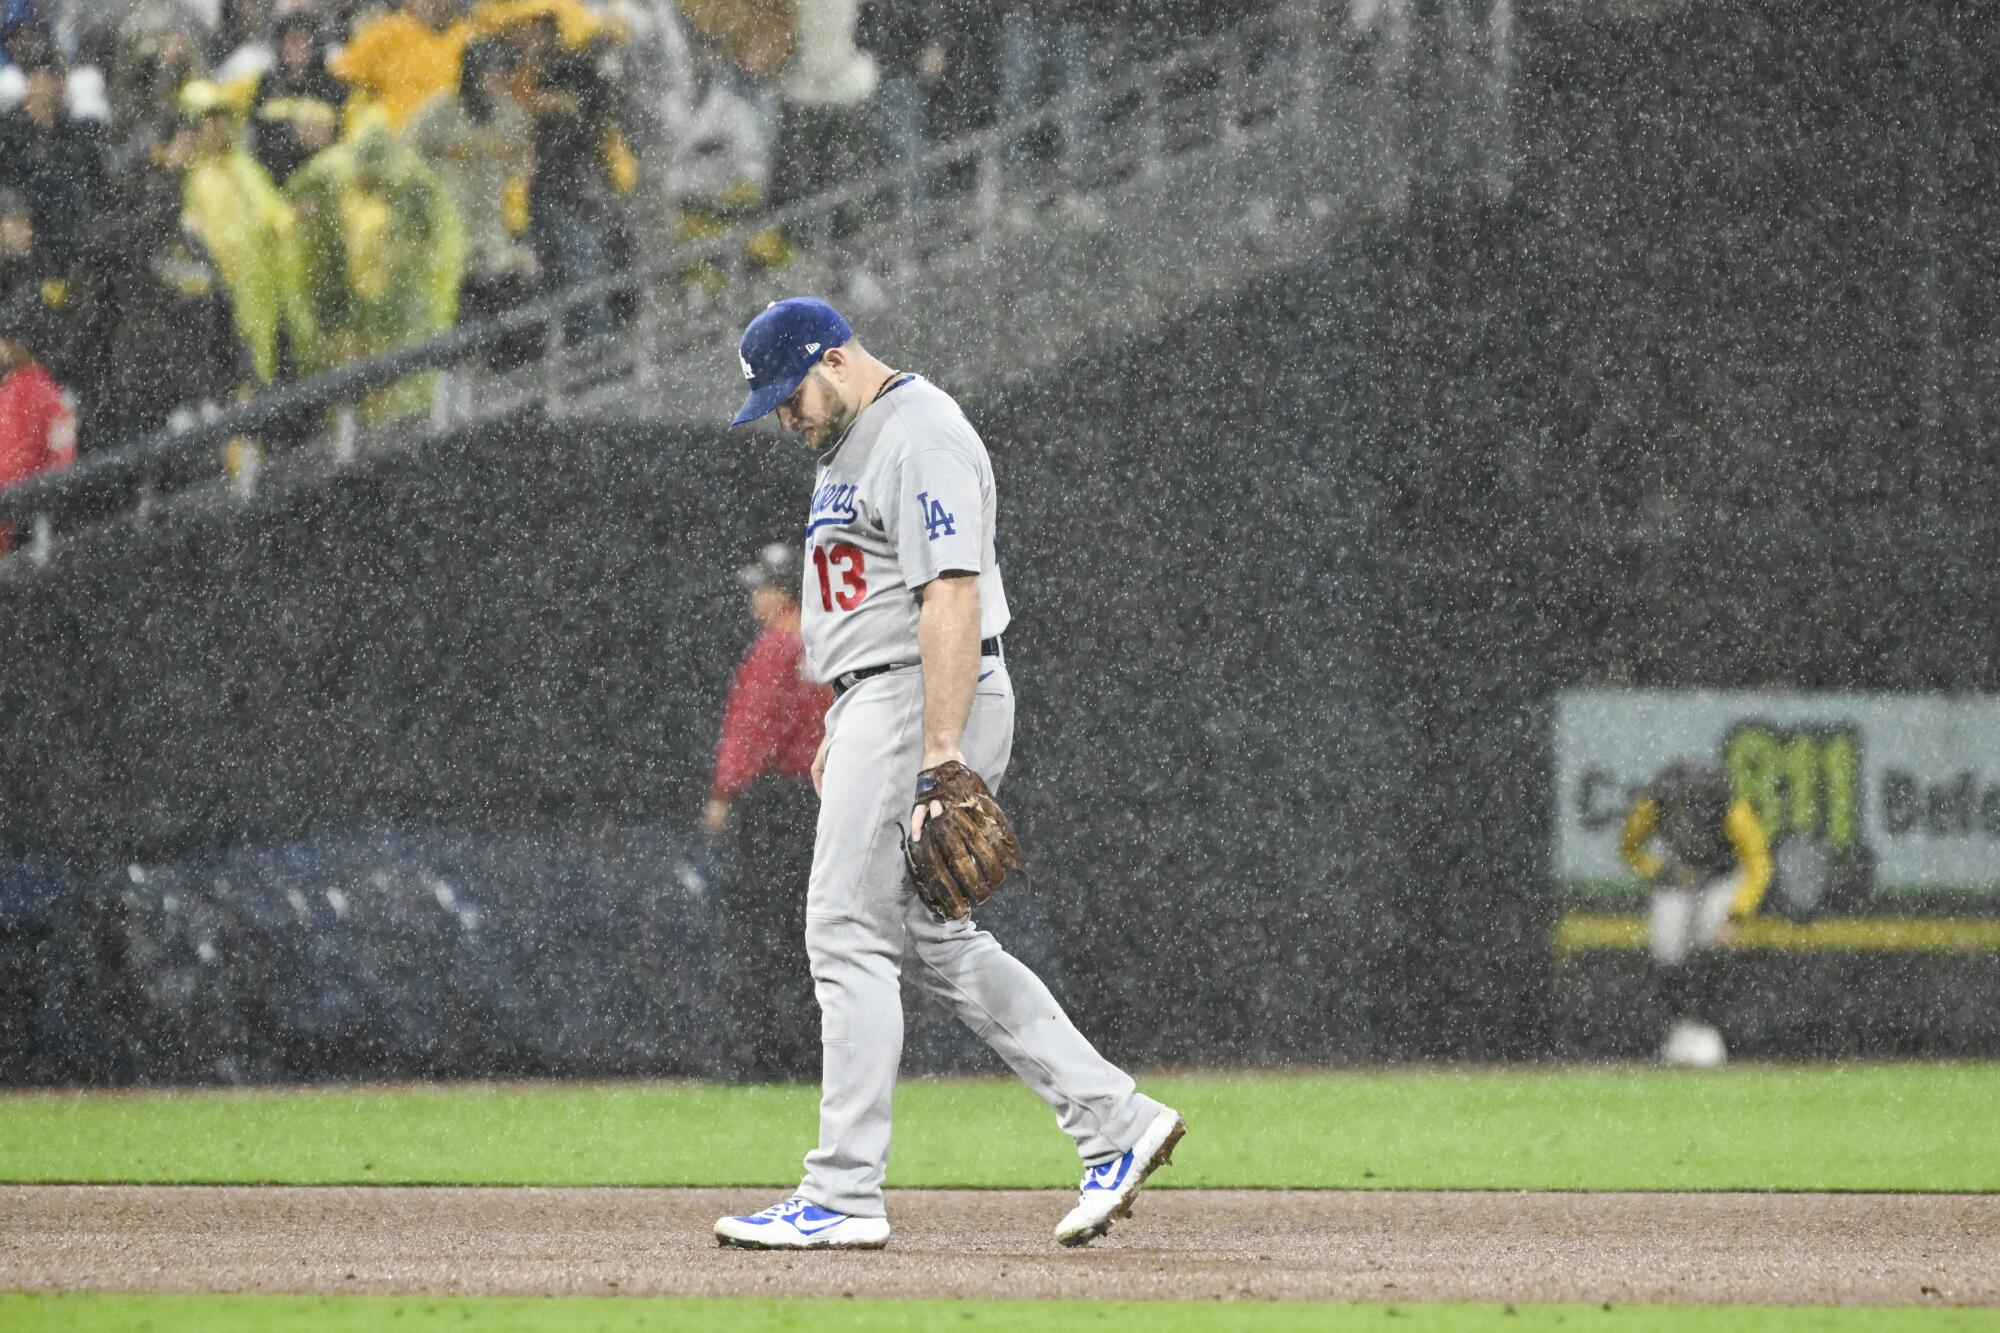 Dodgers second baseman Max Muncy walks on the field in the rain during Game 4 of the NLDS.